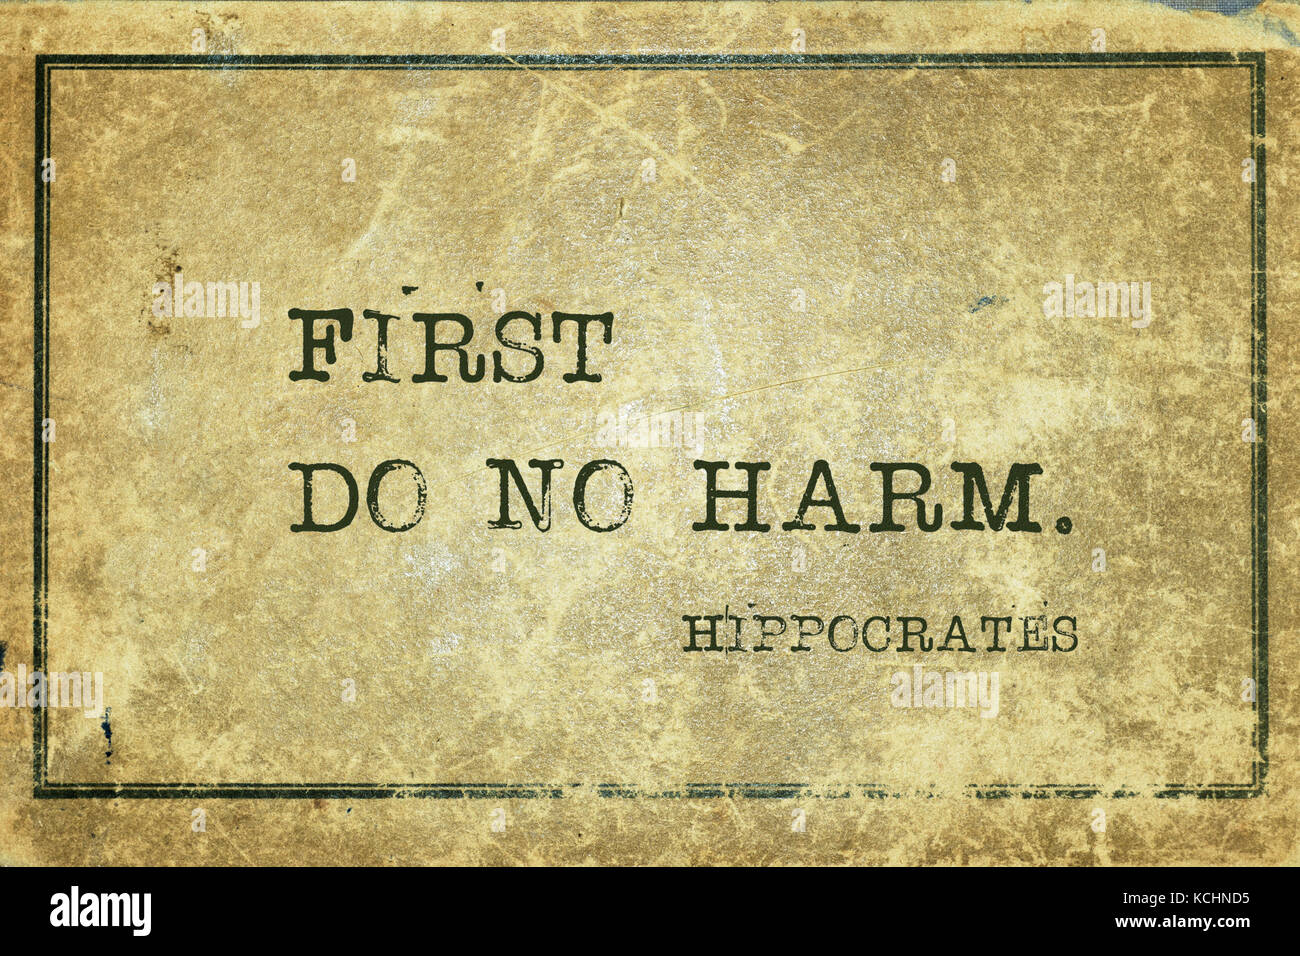 First do no harm - famous ancient Greek physician Hippocrates quote printed on grunge vintage cardboard Stock Photo